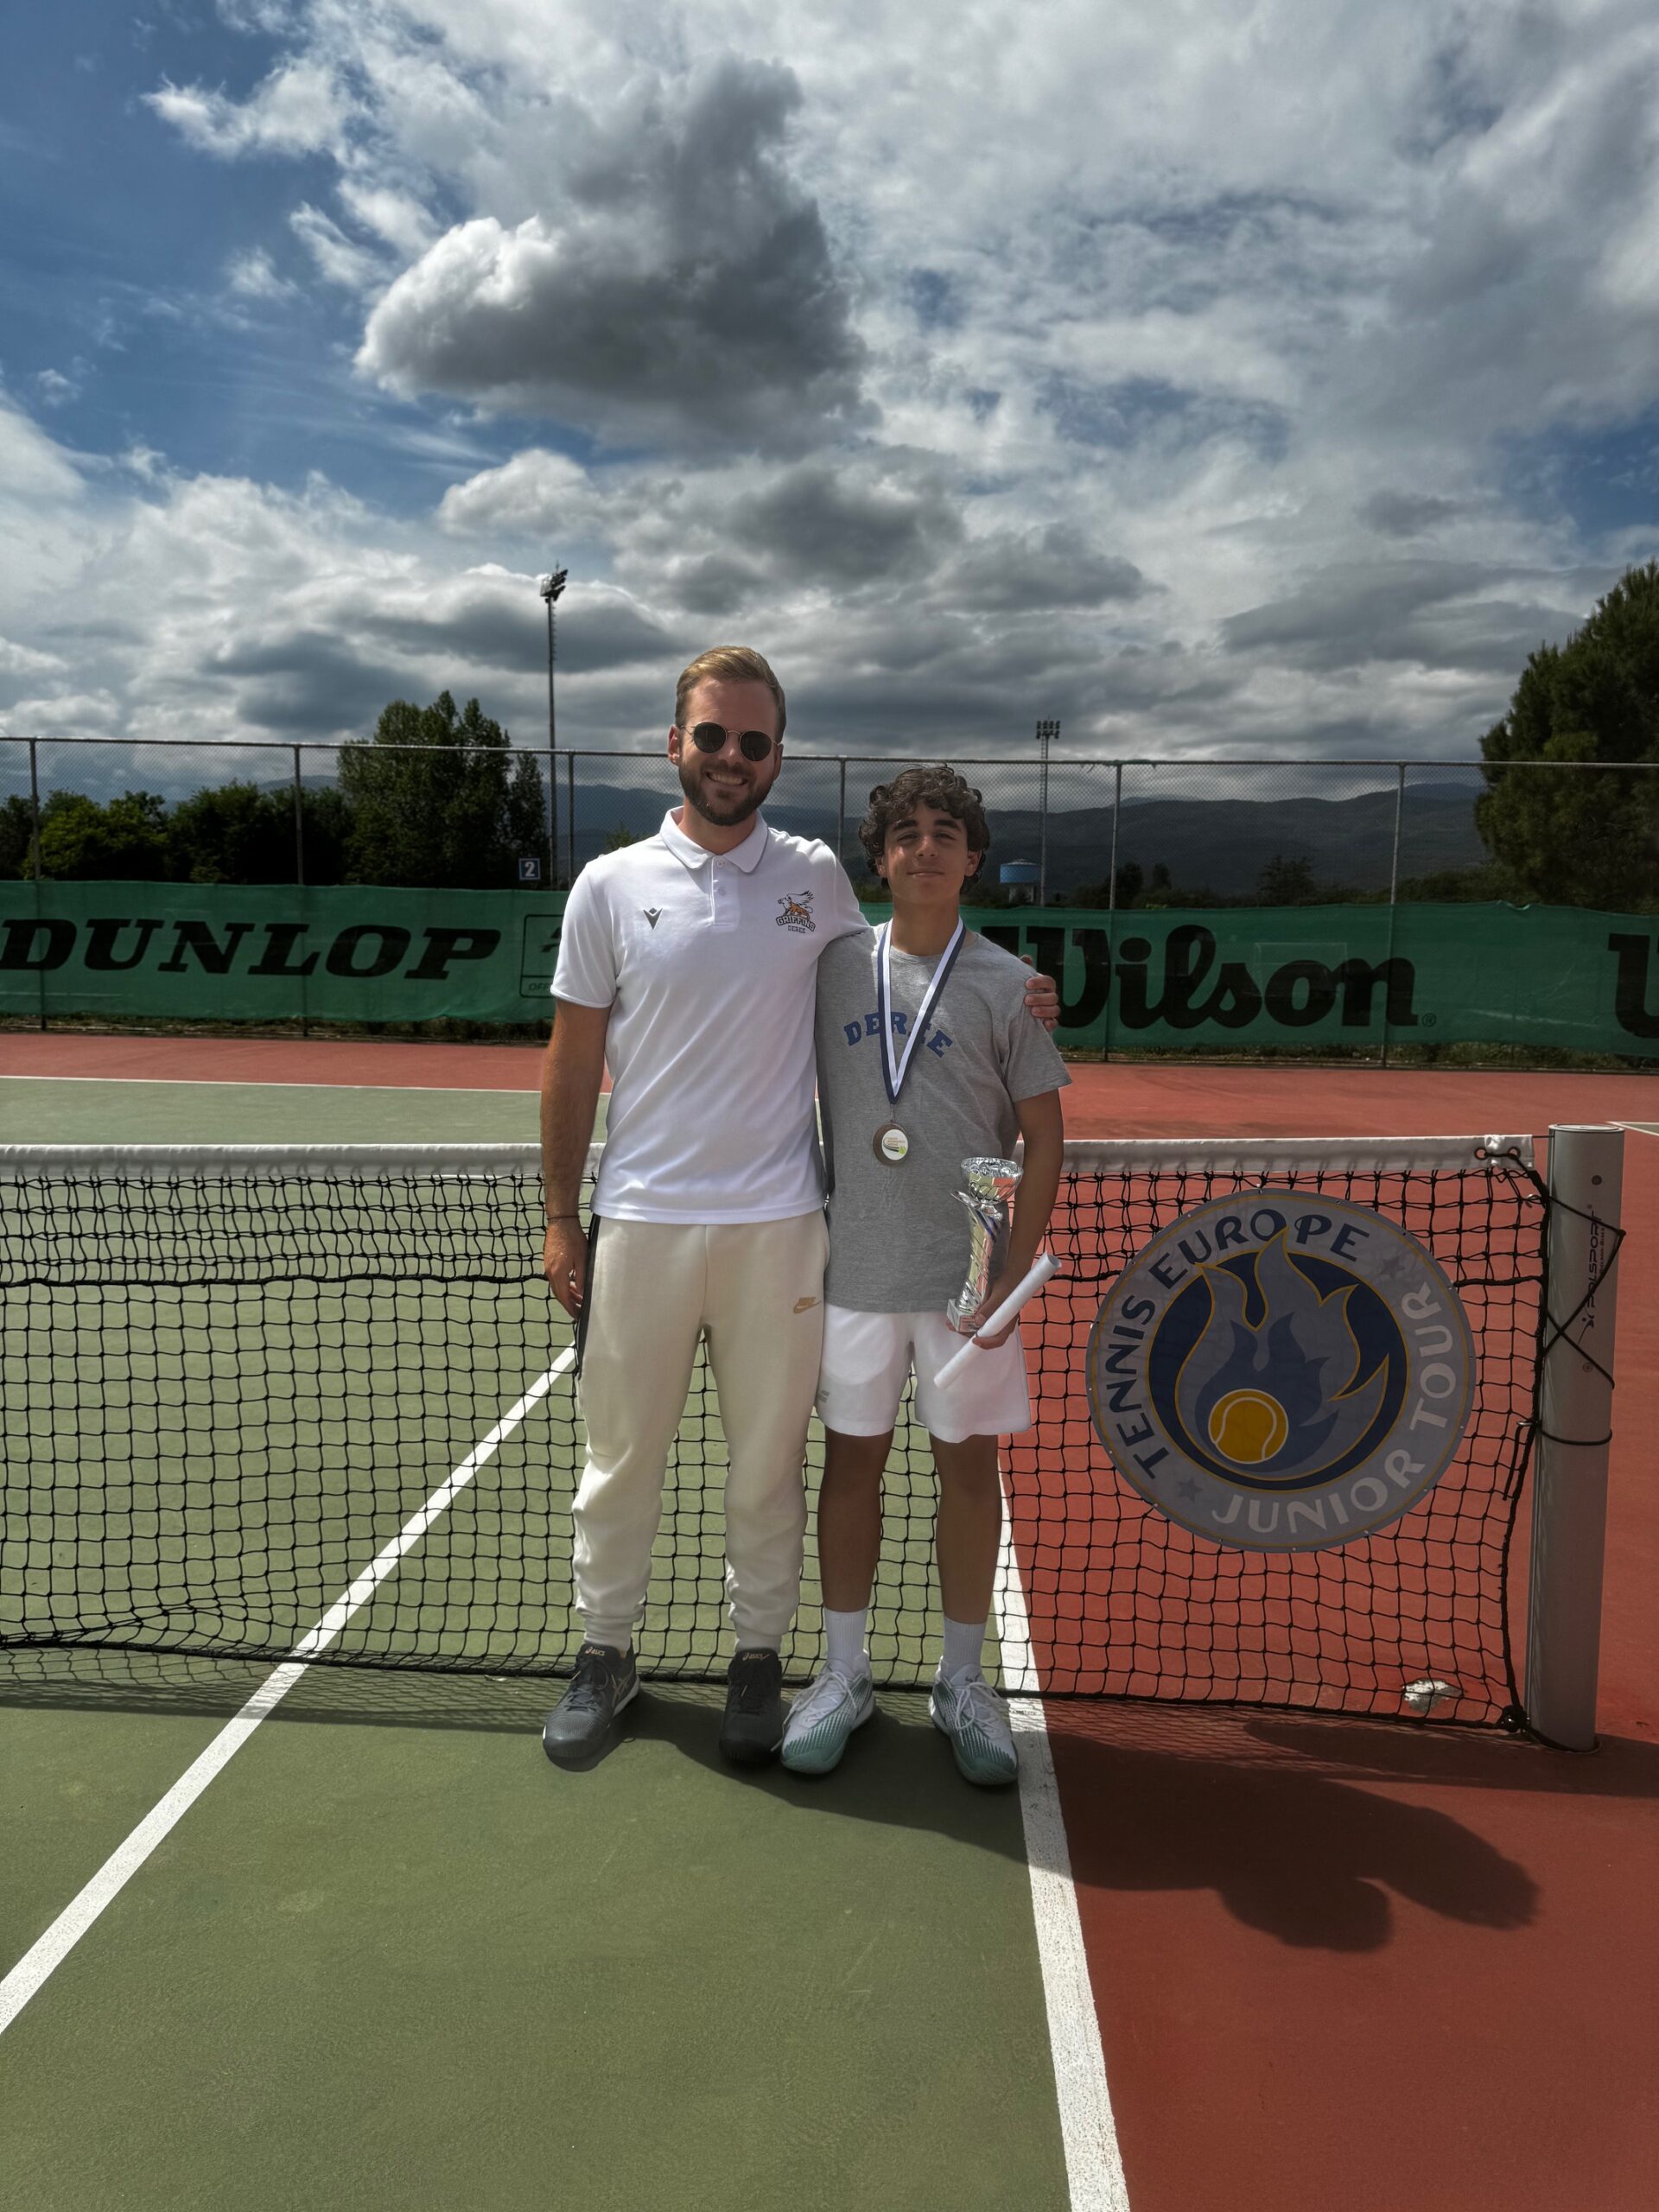 Results for the Deree Tennis Academy that participated at the U16 Tennis Europe International Tournament.